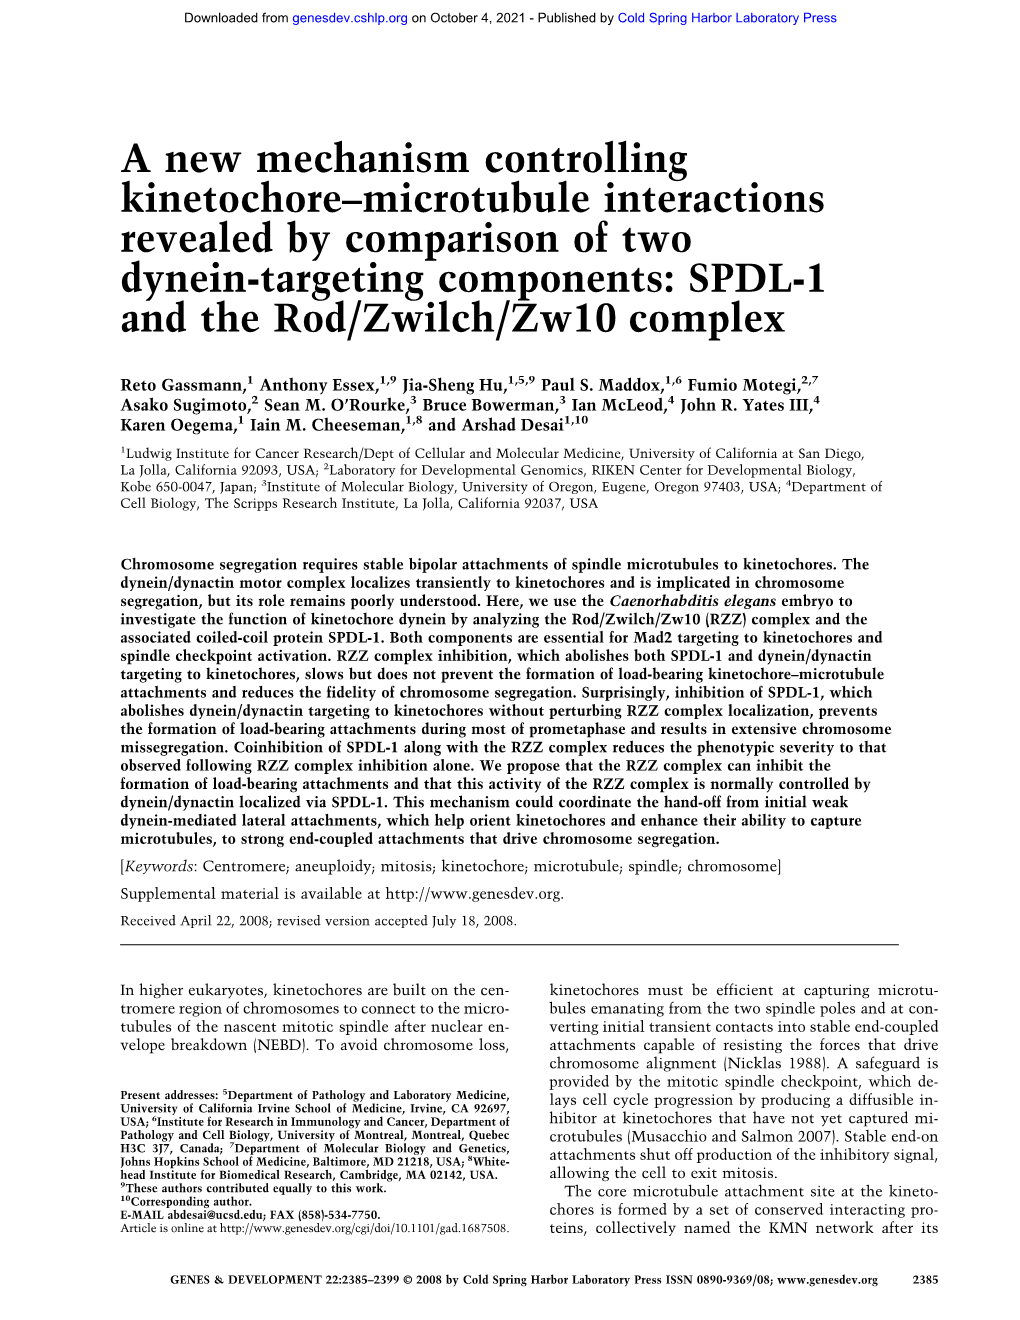 A New Mechanism Controlling Kinetochore–Microtubule Interactions Revealed by Comparison of Two Dynein-Targeting Components: SPDL-1 and the Rod/Zwilch/Zw10 Complex